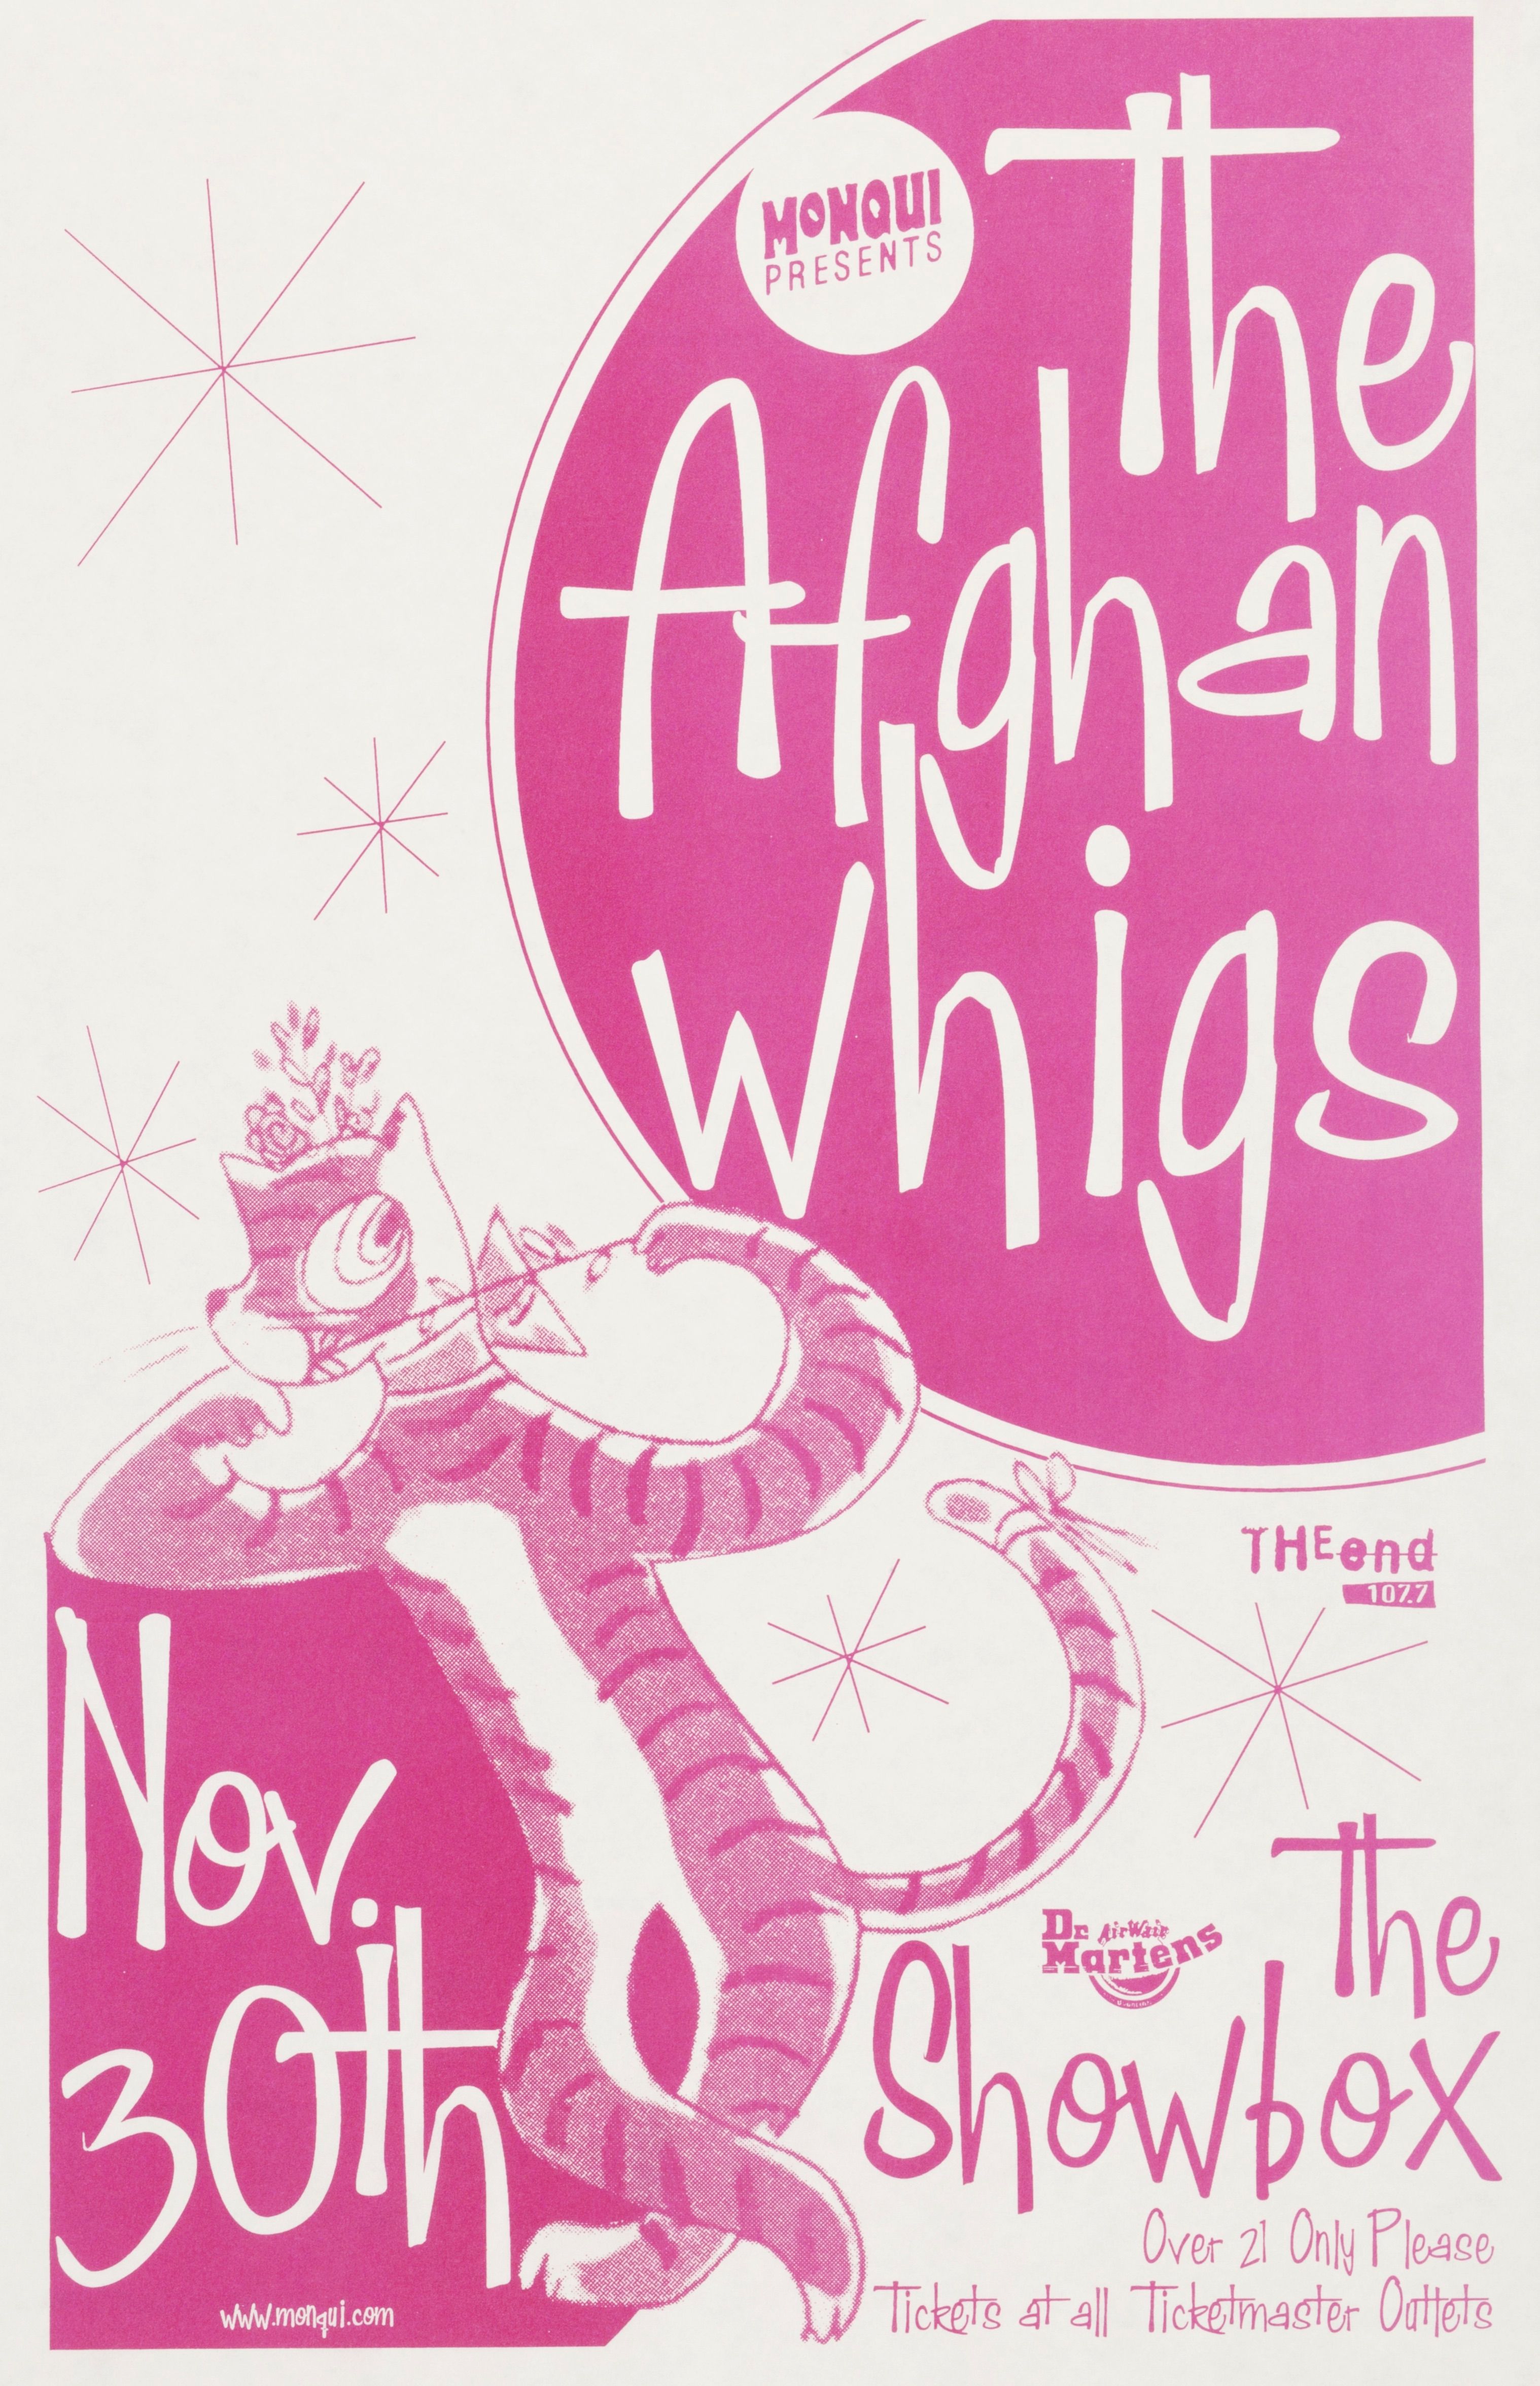 MXP-190.7 Afghan Whigs 1998 Showbox Pink Concert Poster